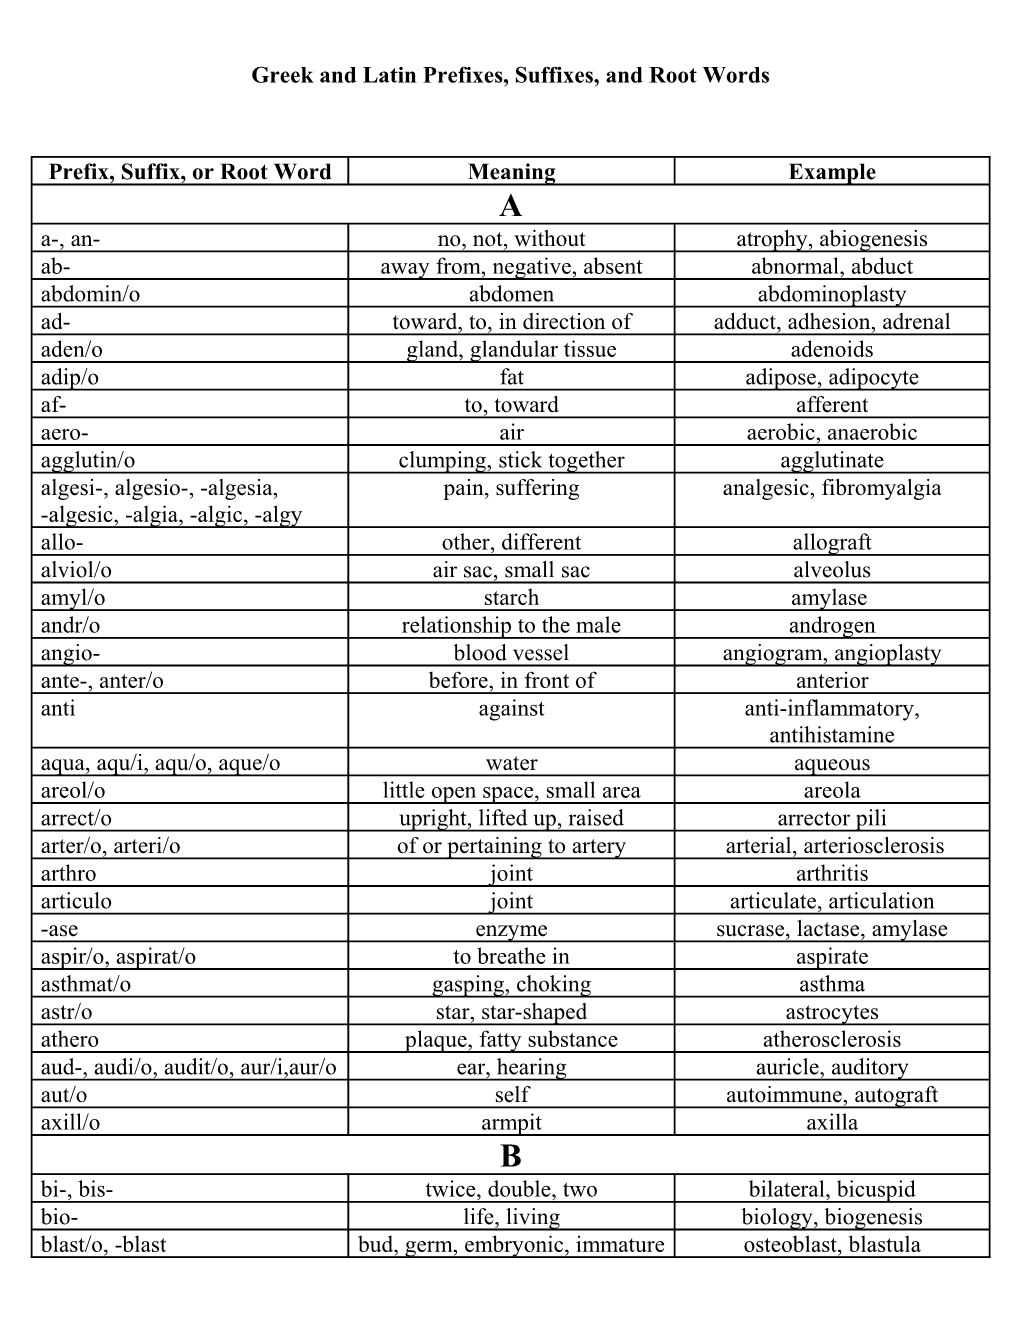 Greek and Latin Prefixes, Suffixes, and Root Words